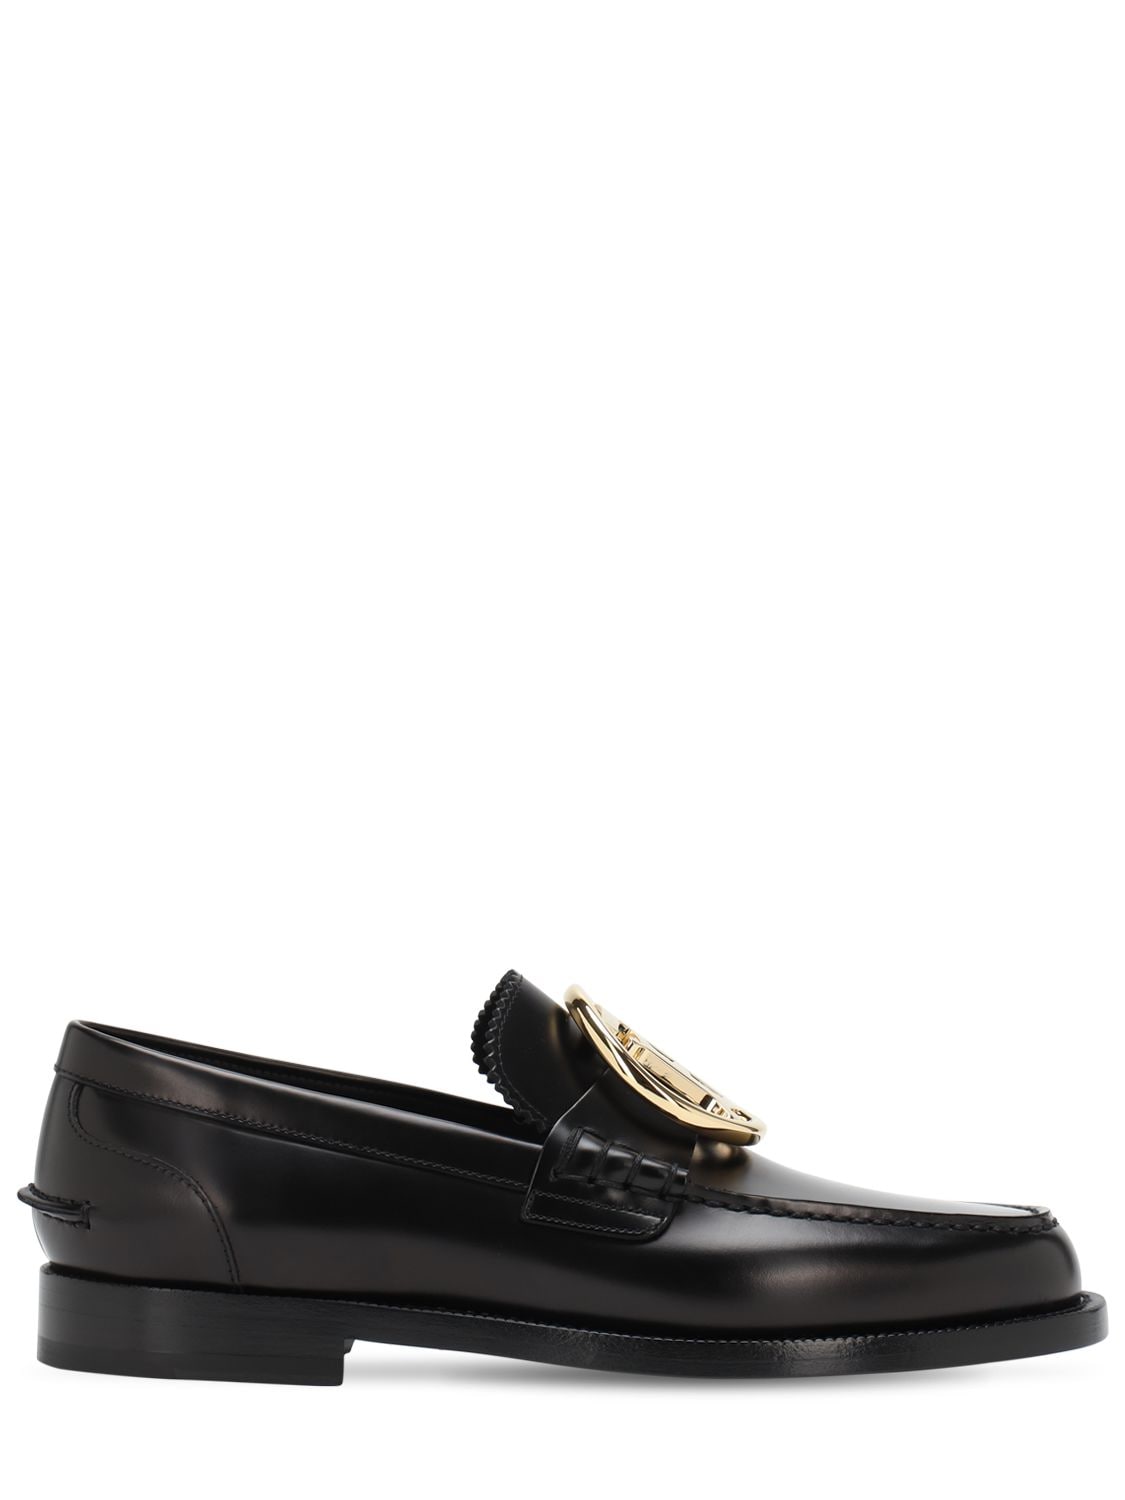 BURBERRY PATENT LEATHER LOAFERS,71IWO0016-QTEXODK1